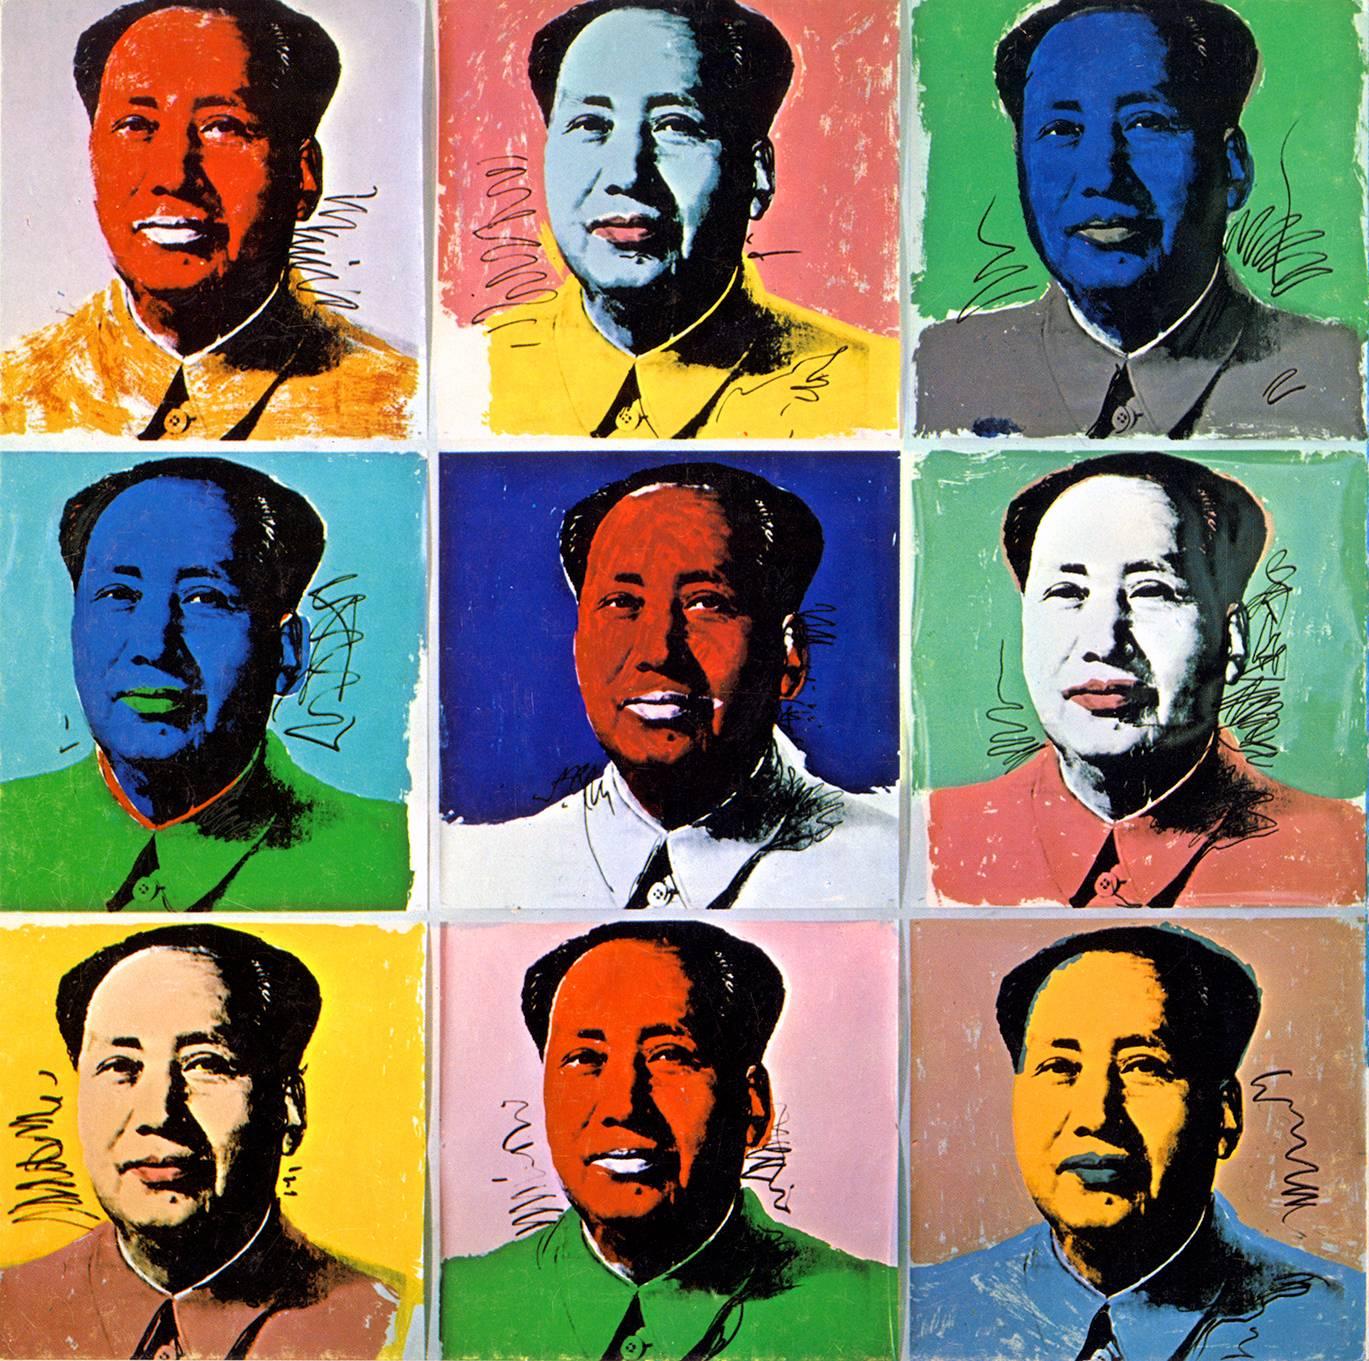 Andy Warhol Mao 1972 announcement (Andy Warhol Leo Castelli gallery)  - Pop Art Art by (after) Andy Warhol